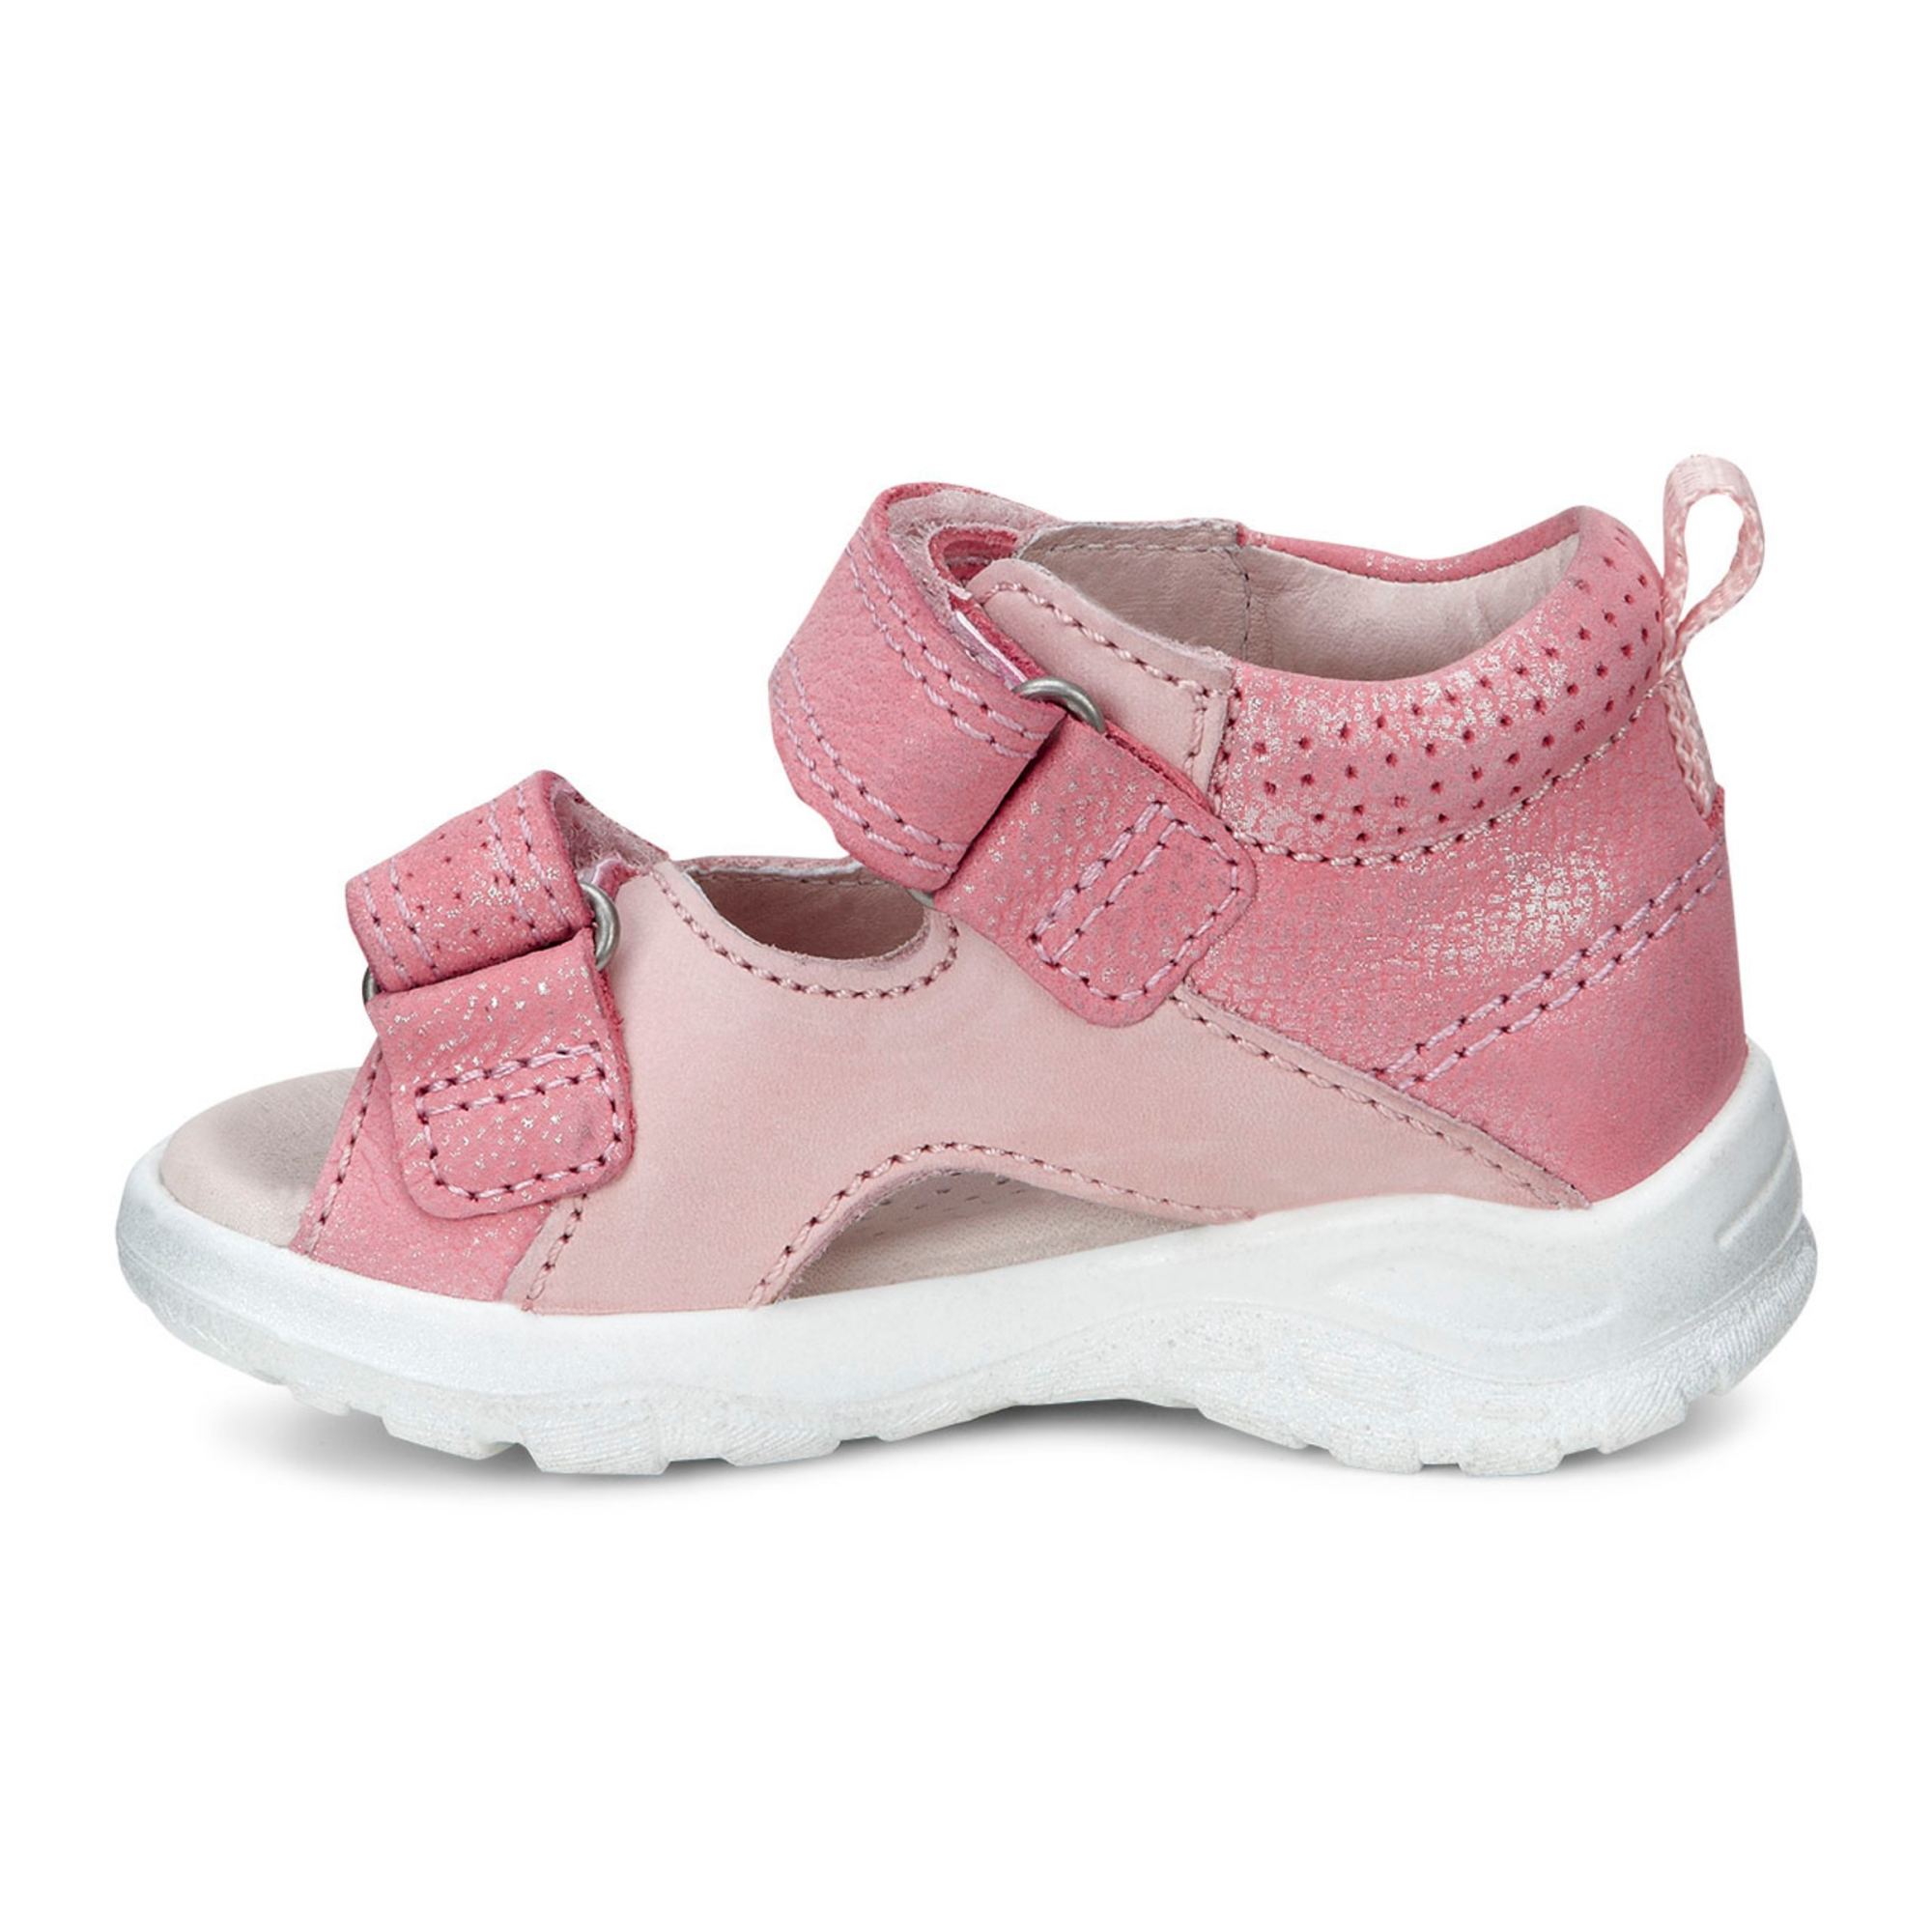 Ecco Peekaboo Infants Sandal 23 - Products - Veryk Mall - Veryk Mall, many product, quick your money!